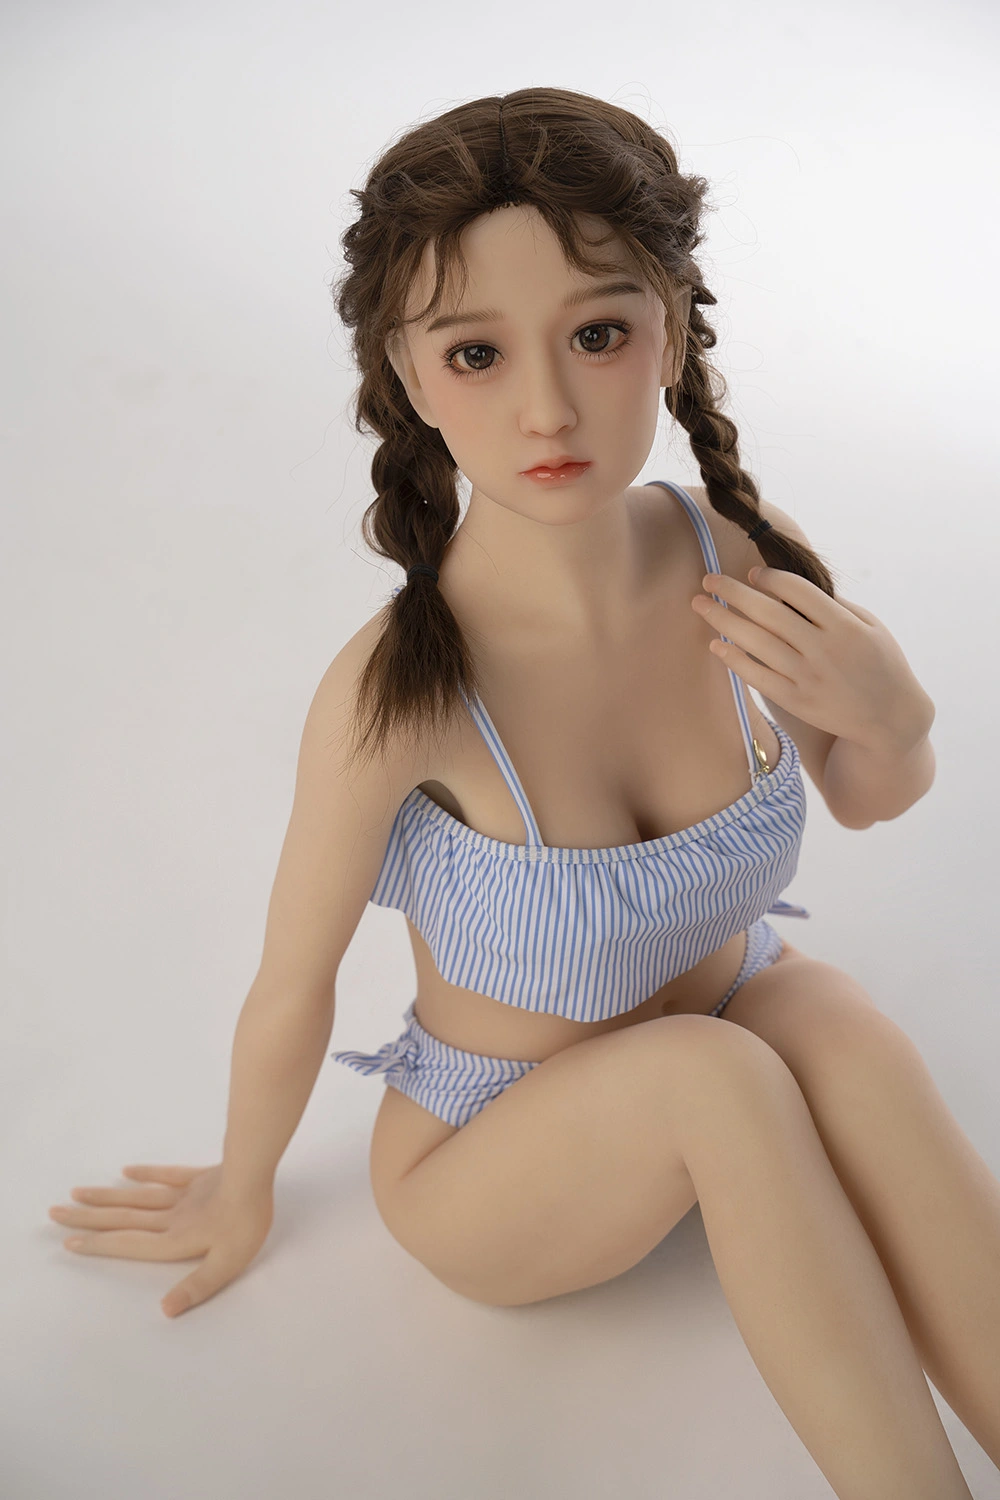  mixed-race style TPE erotic doll